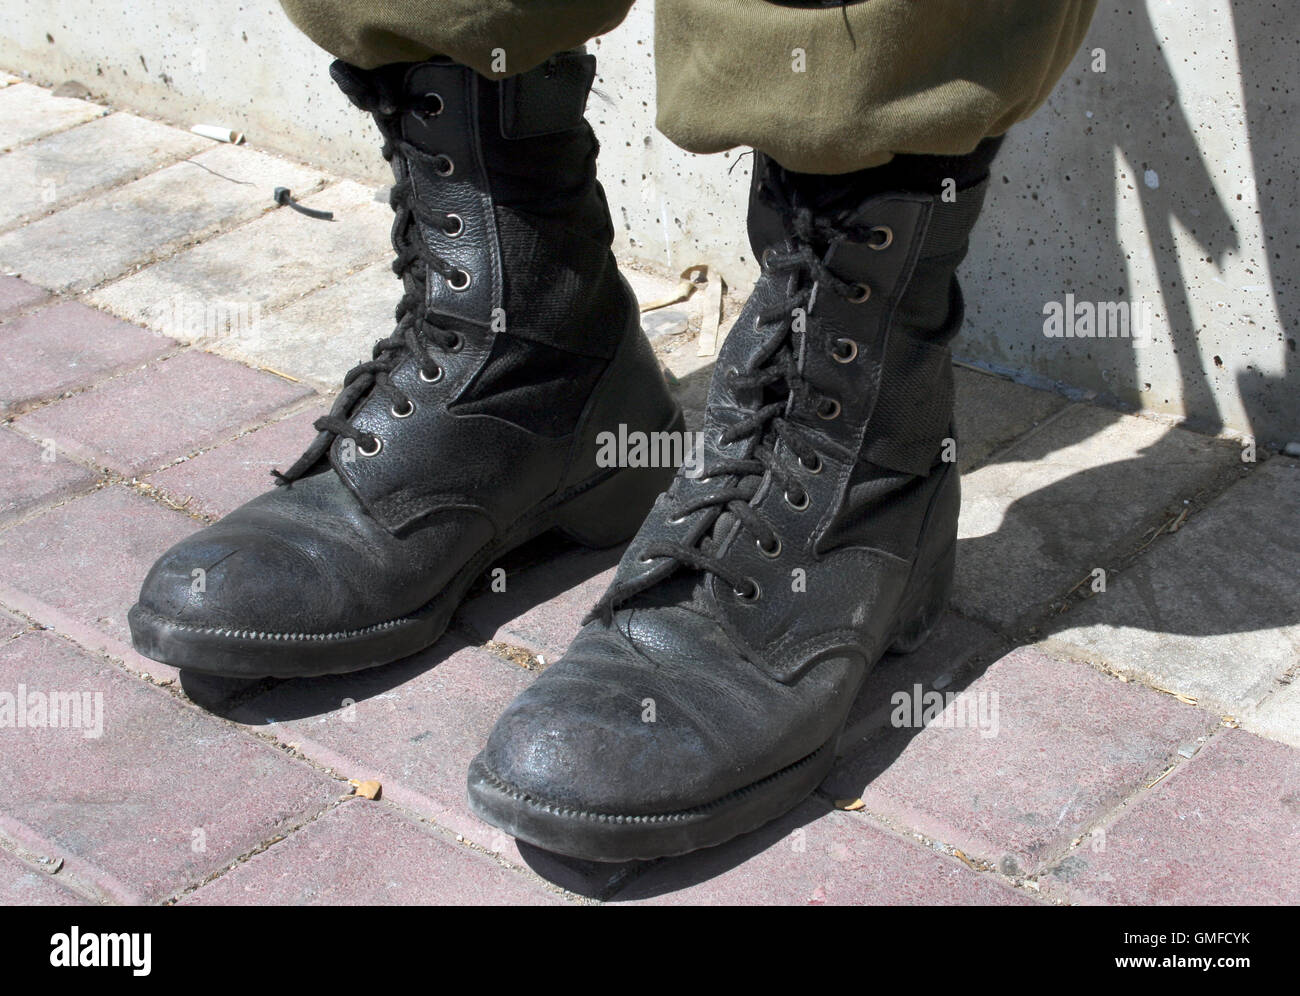 Soldier Daniela Joeli wears black synthetic boots the military base at  controller Makkabim between Israel and the Palestinian West Bank, Israel,  16 August 2016. The Israelian army offers vegan food since the